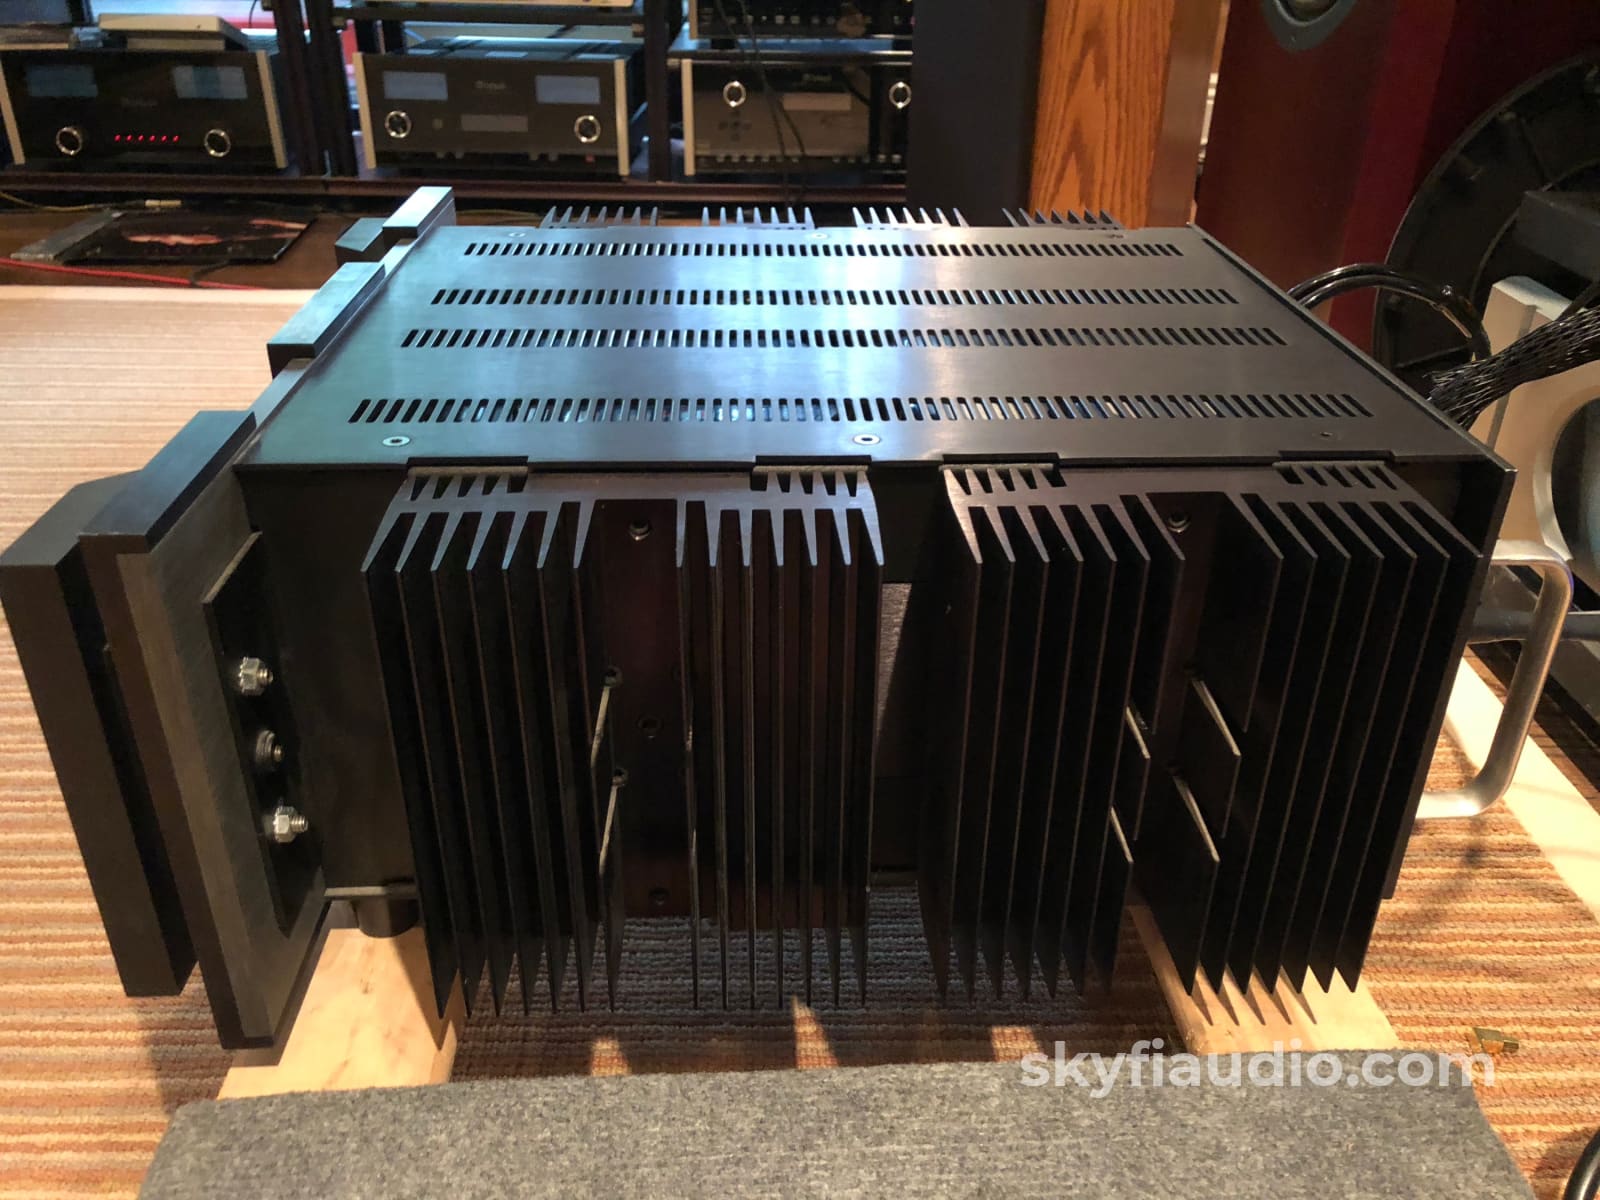 Krell Ksa-200S 200W Solid State Amplifier - Just Serviced And Perfect